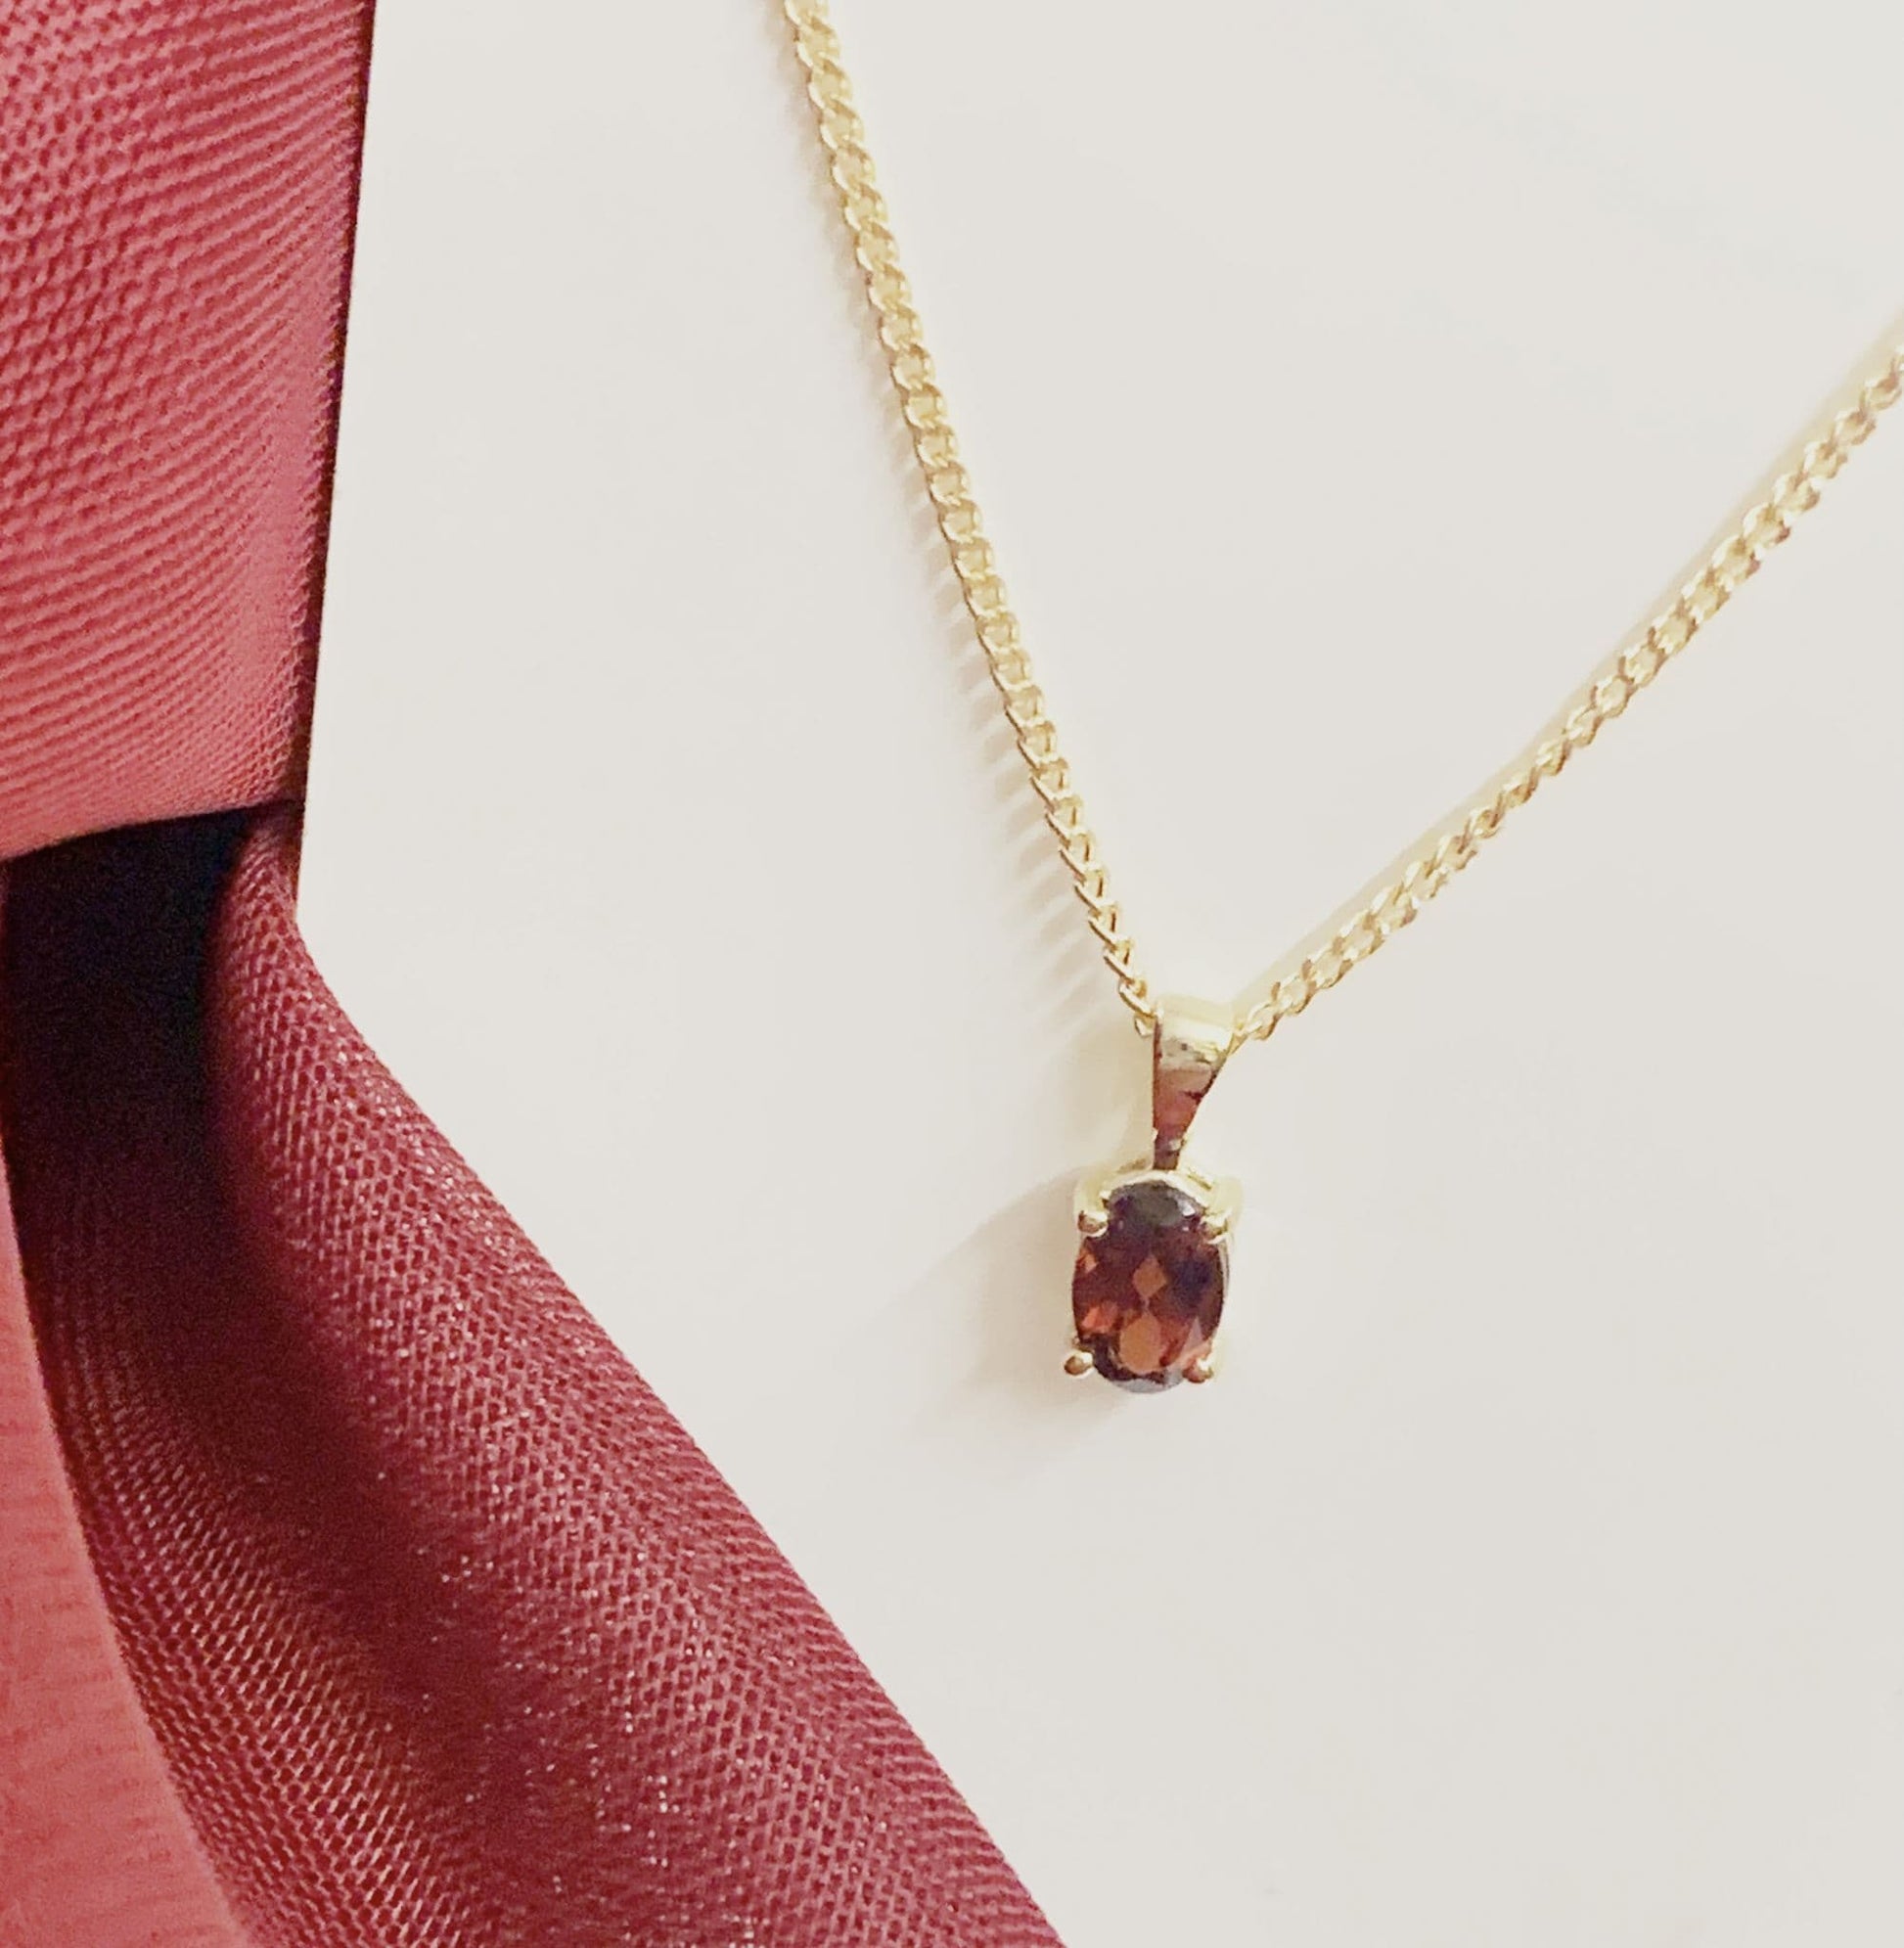 Oval Red Garnet Necklace Pendant Yellow Gold